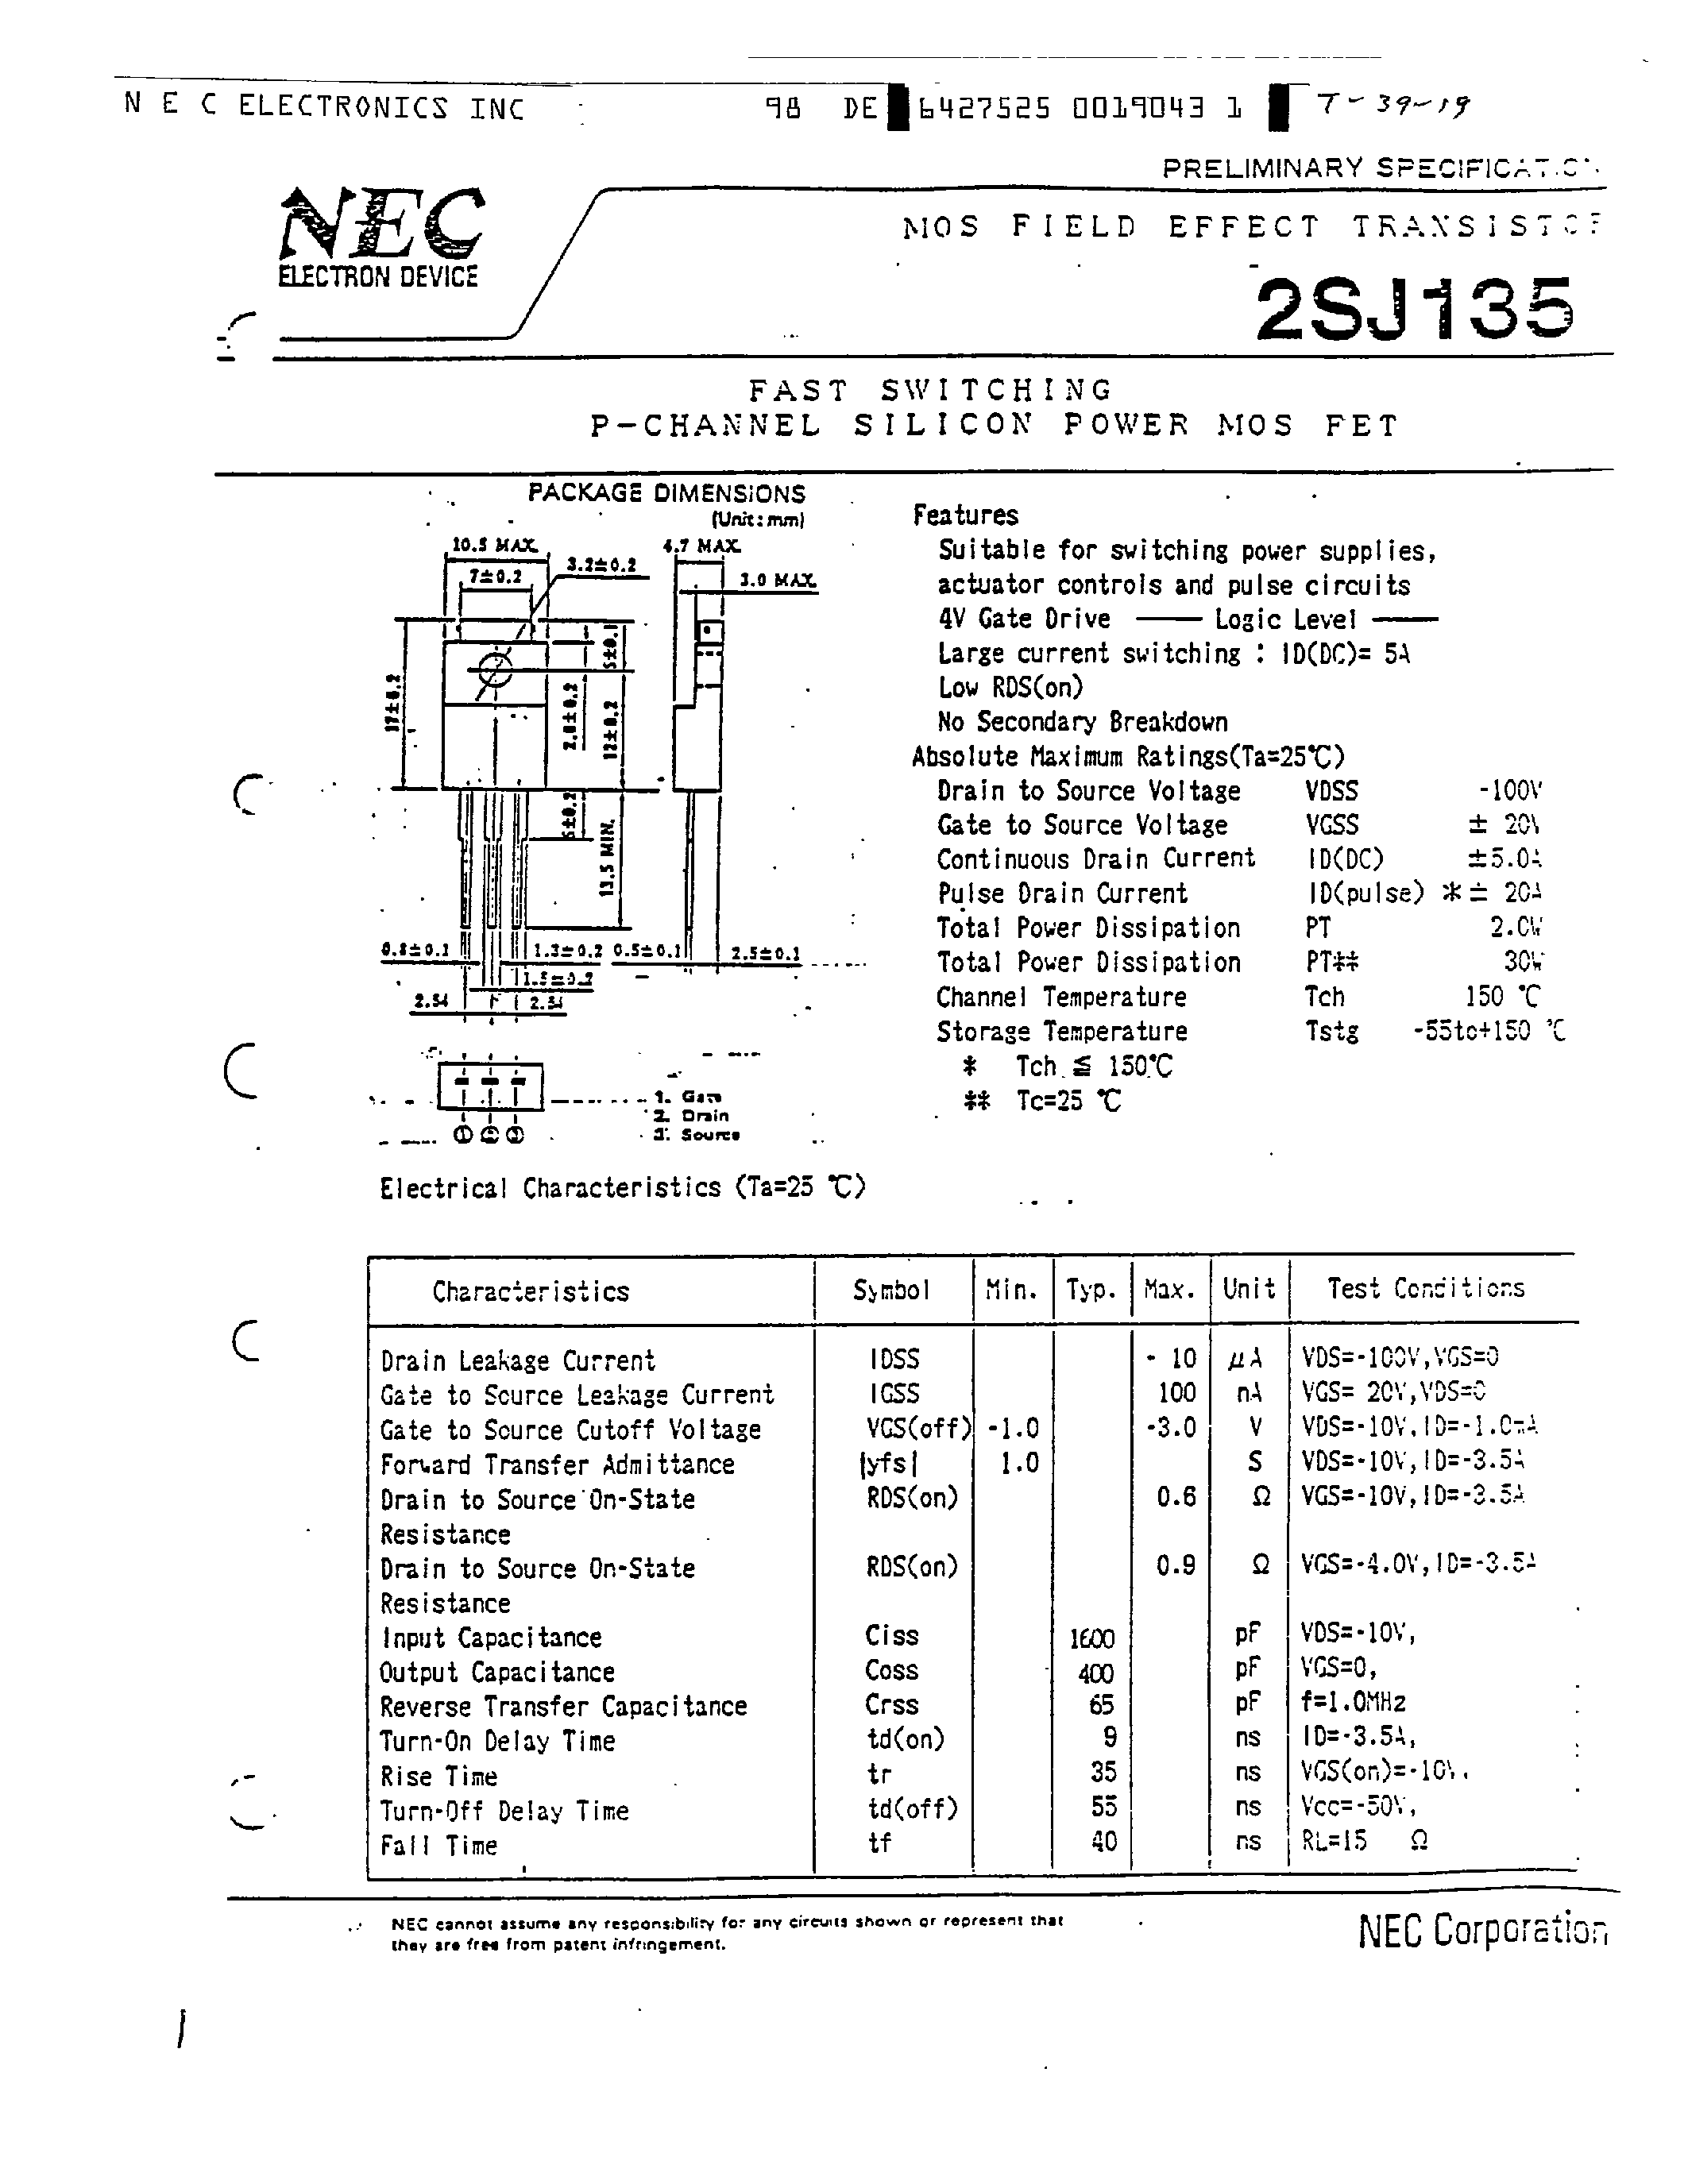 Datasheet 2SJ135 - FAST SWITCHING P-CHANNEL SILICON POWER MOS FET page 1